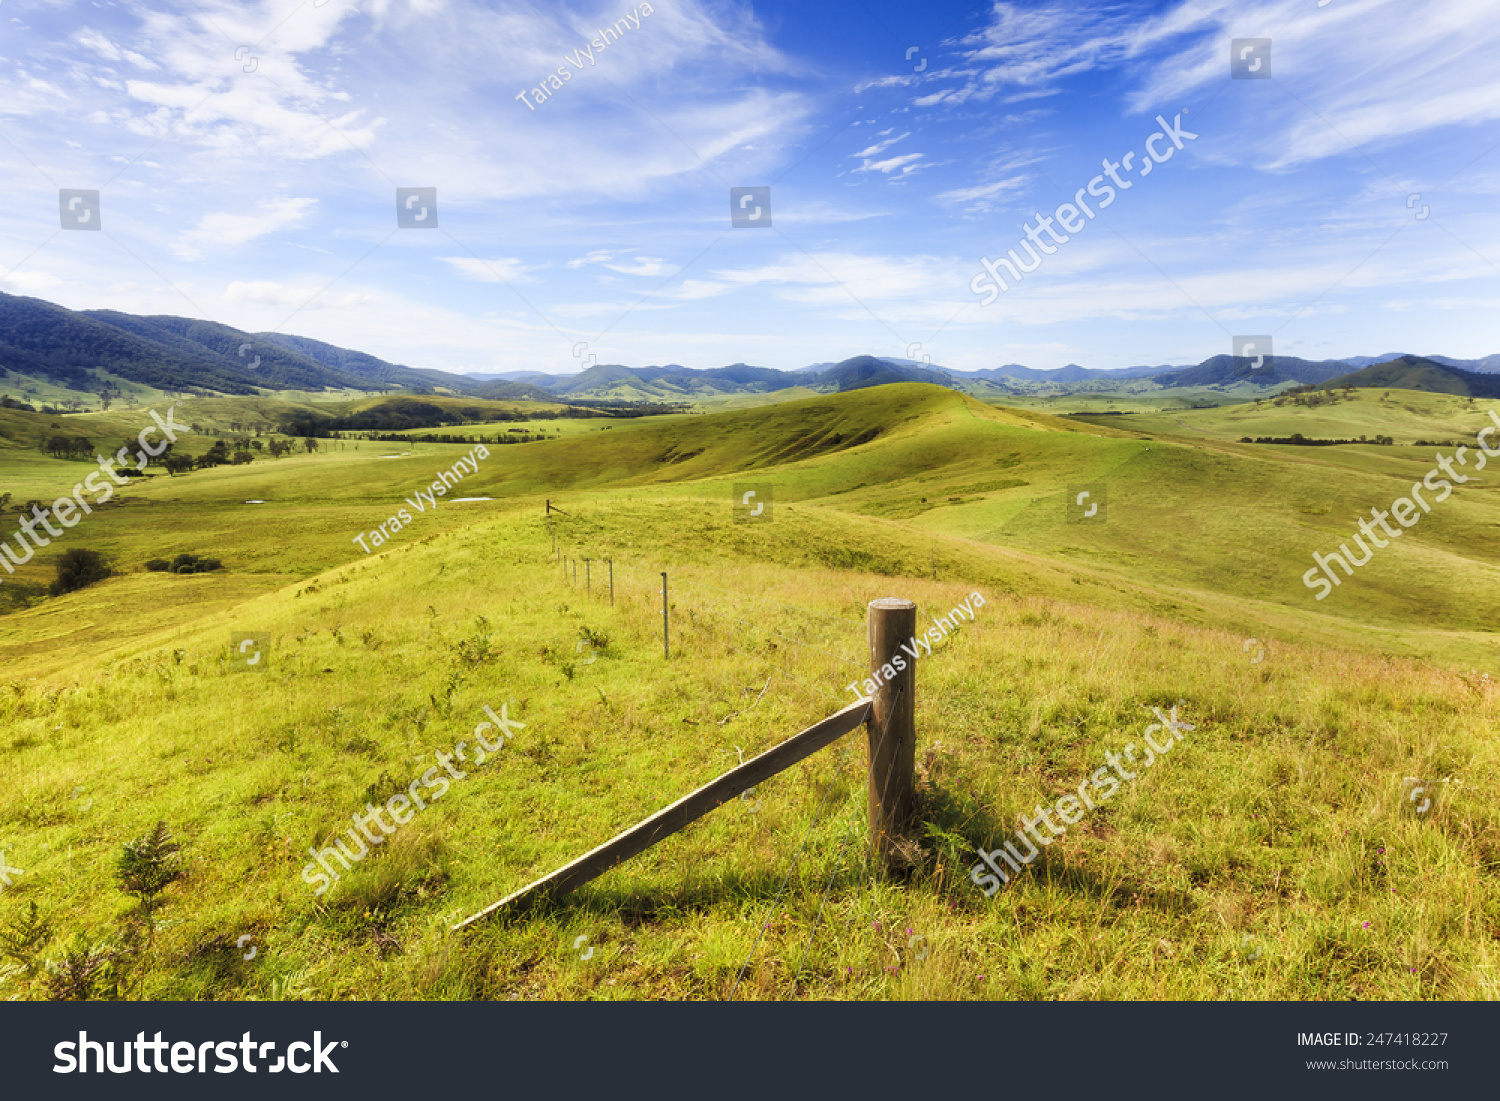 Australia regional NSW rural landscape of grazing cultivated agricultural land in Barrington tops region developed for cattle growing  #247418227